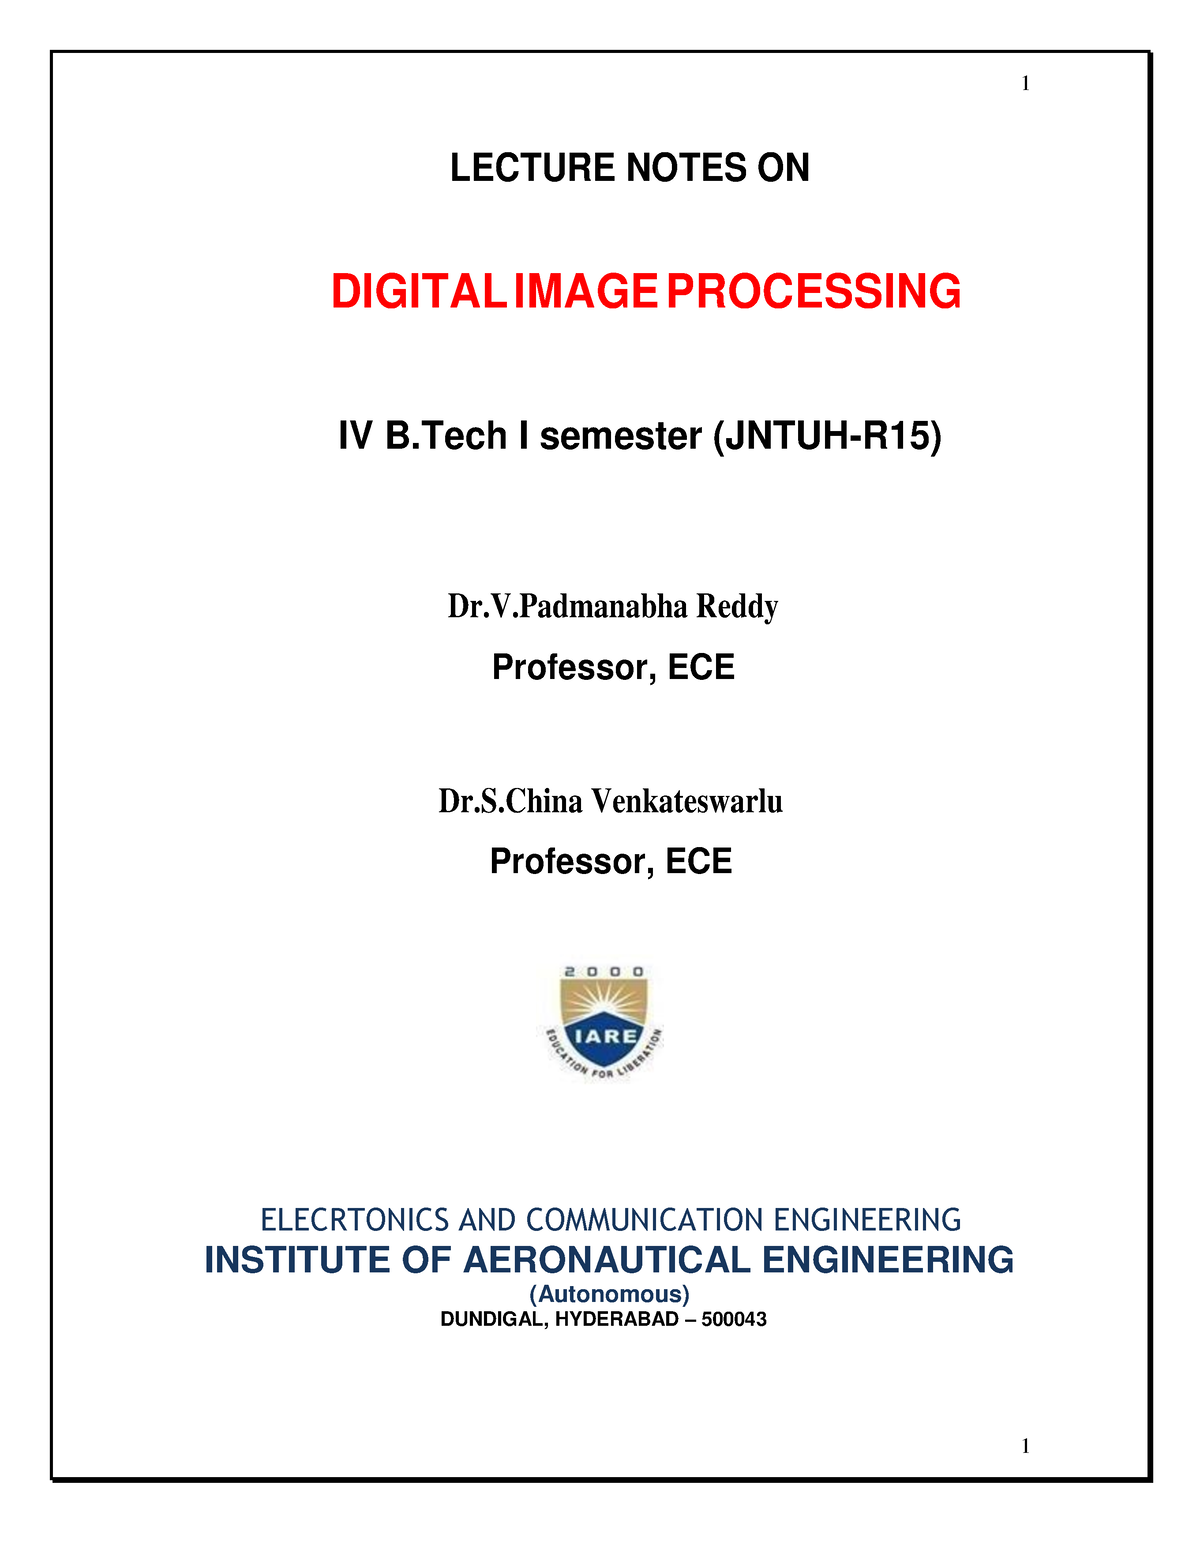 recent research paper on digital image processing